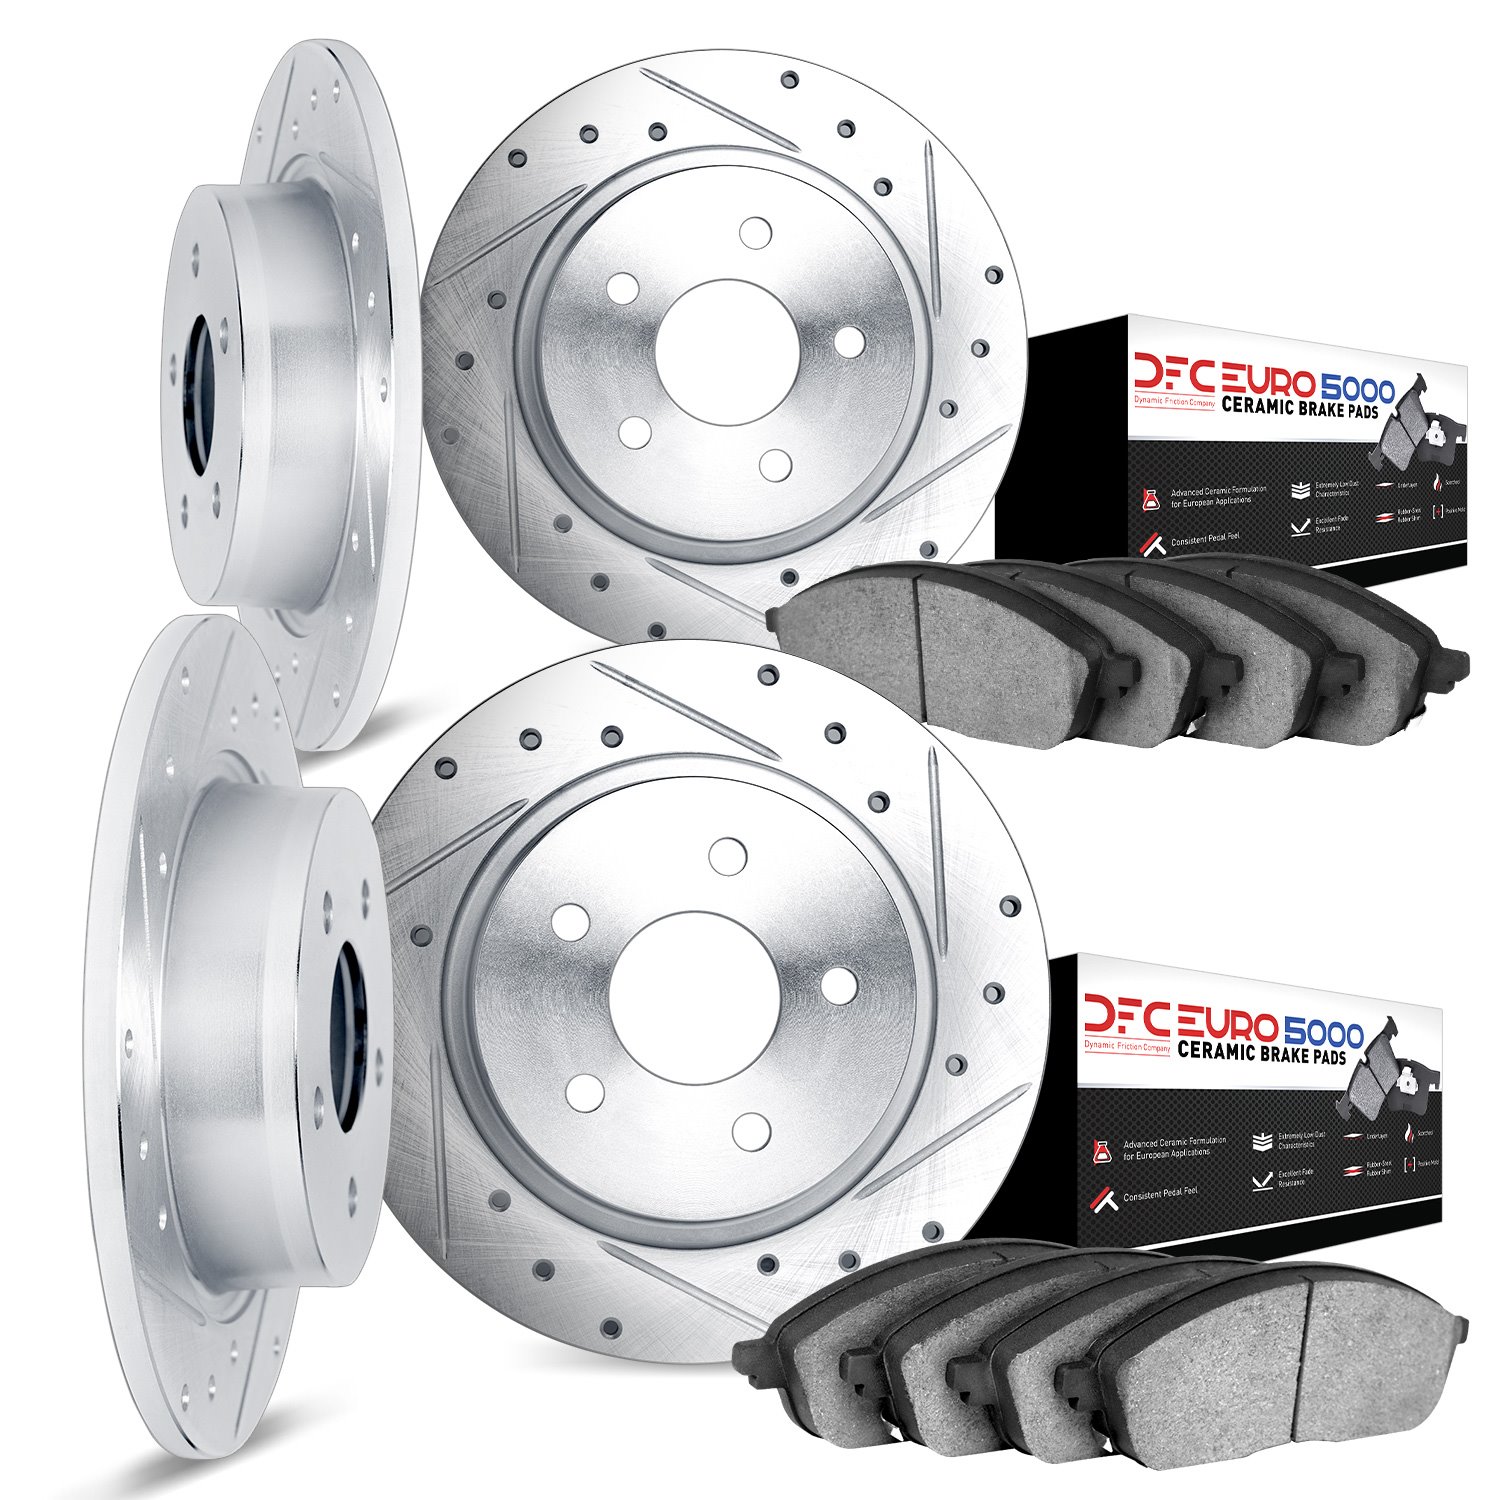 7604-63006 Drilled/Slotted Brake Rotors w/5000 Euro Ceramic Brake Pads Kit [Silver], 1968-1976 Mercedes-Benz, Position: Front an